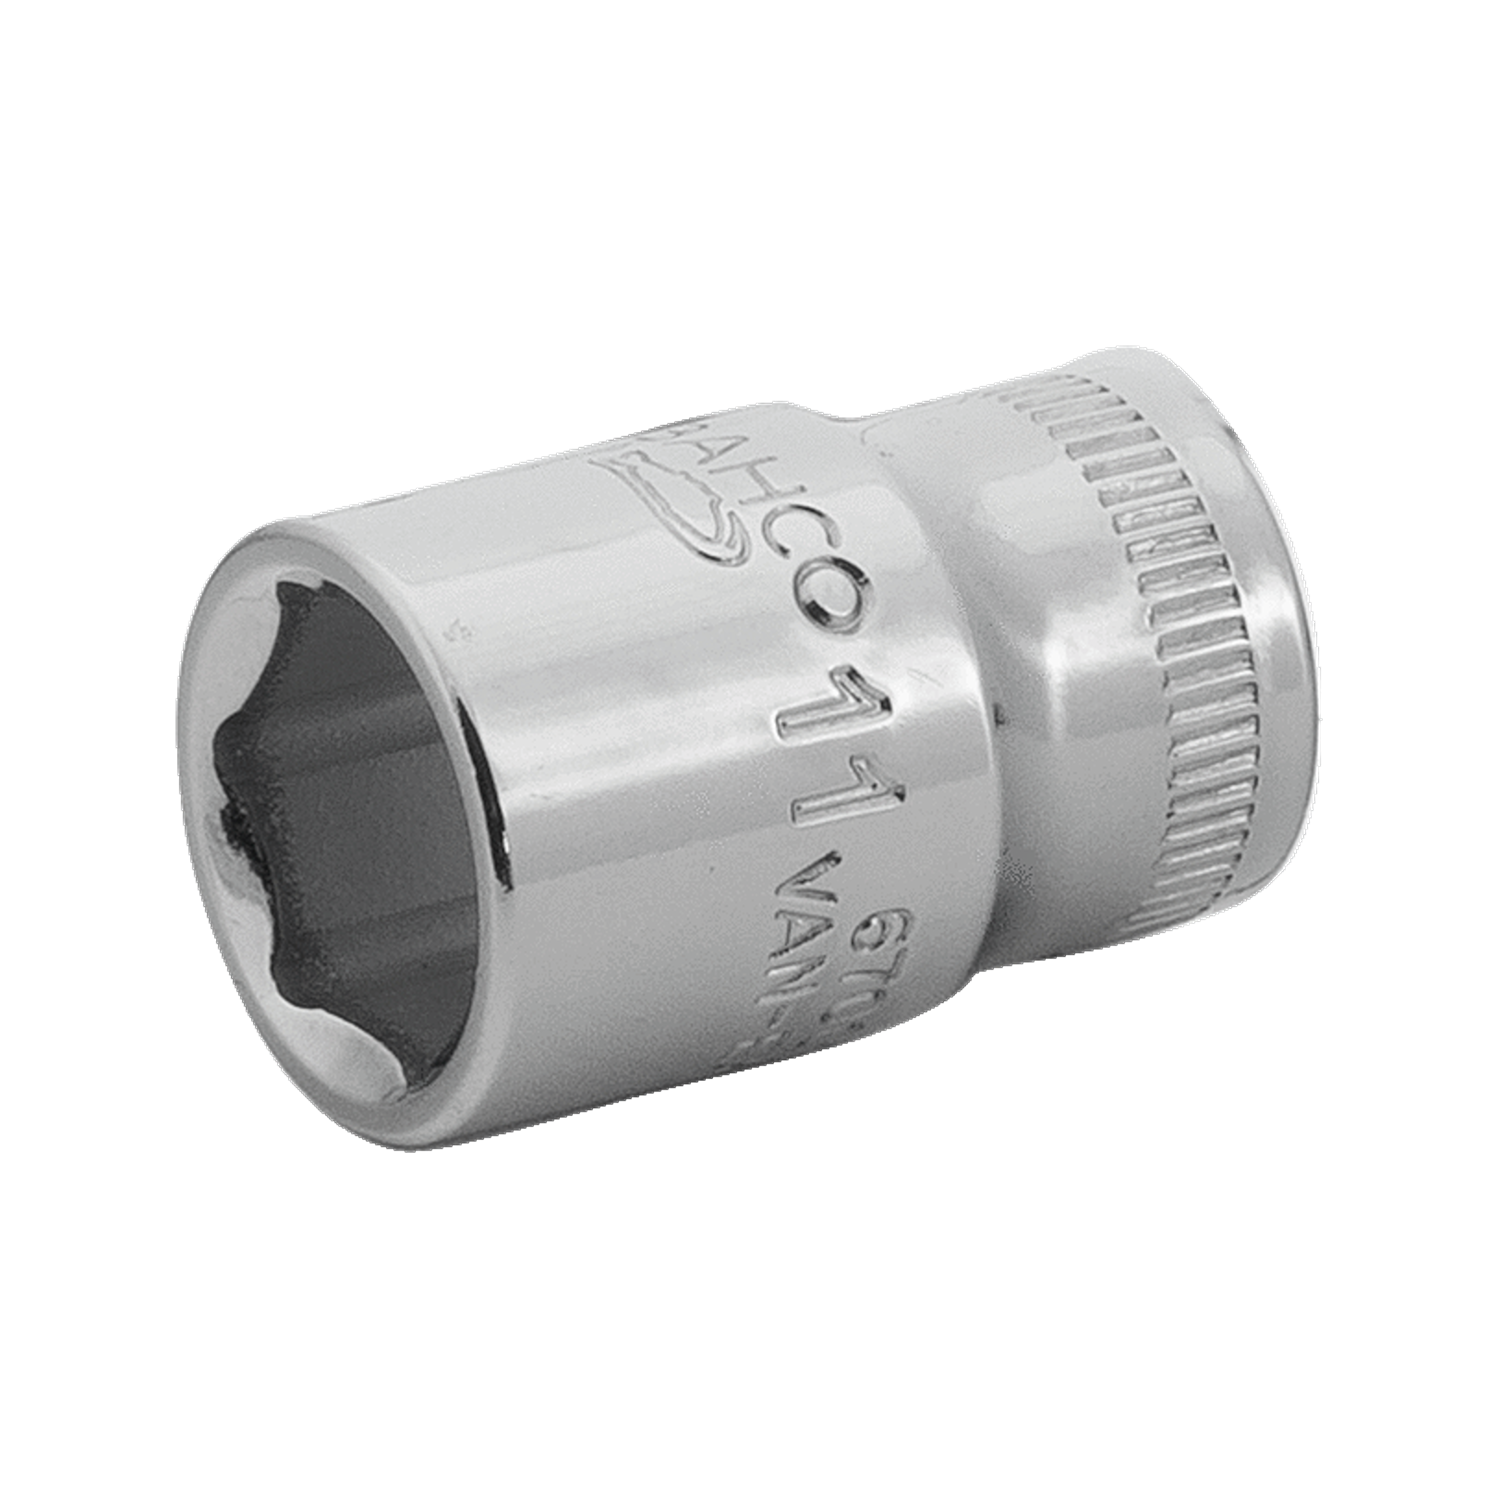 BAHCO 6700SM 1/4" Square Drive Socket With Metric Hex Profile - Premium Square Drive Socket from BAHCO - Shop now at Yew Aik.